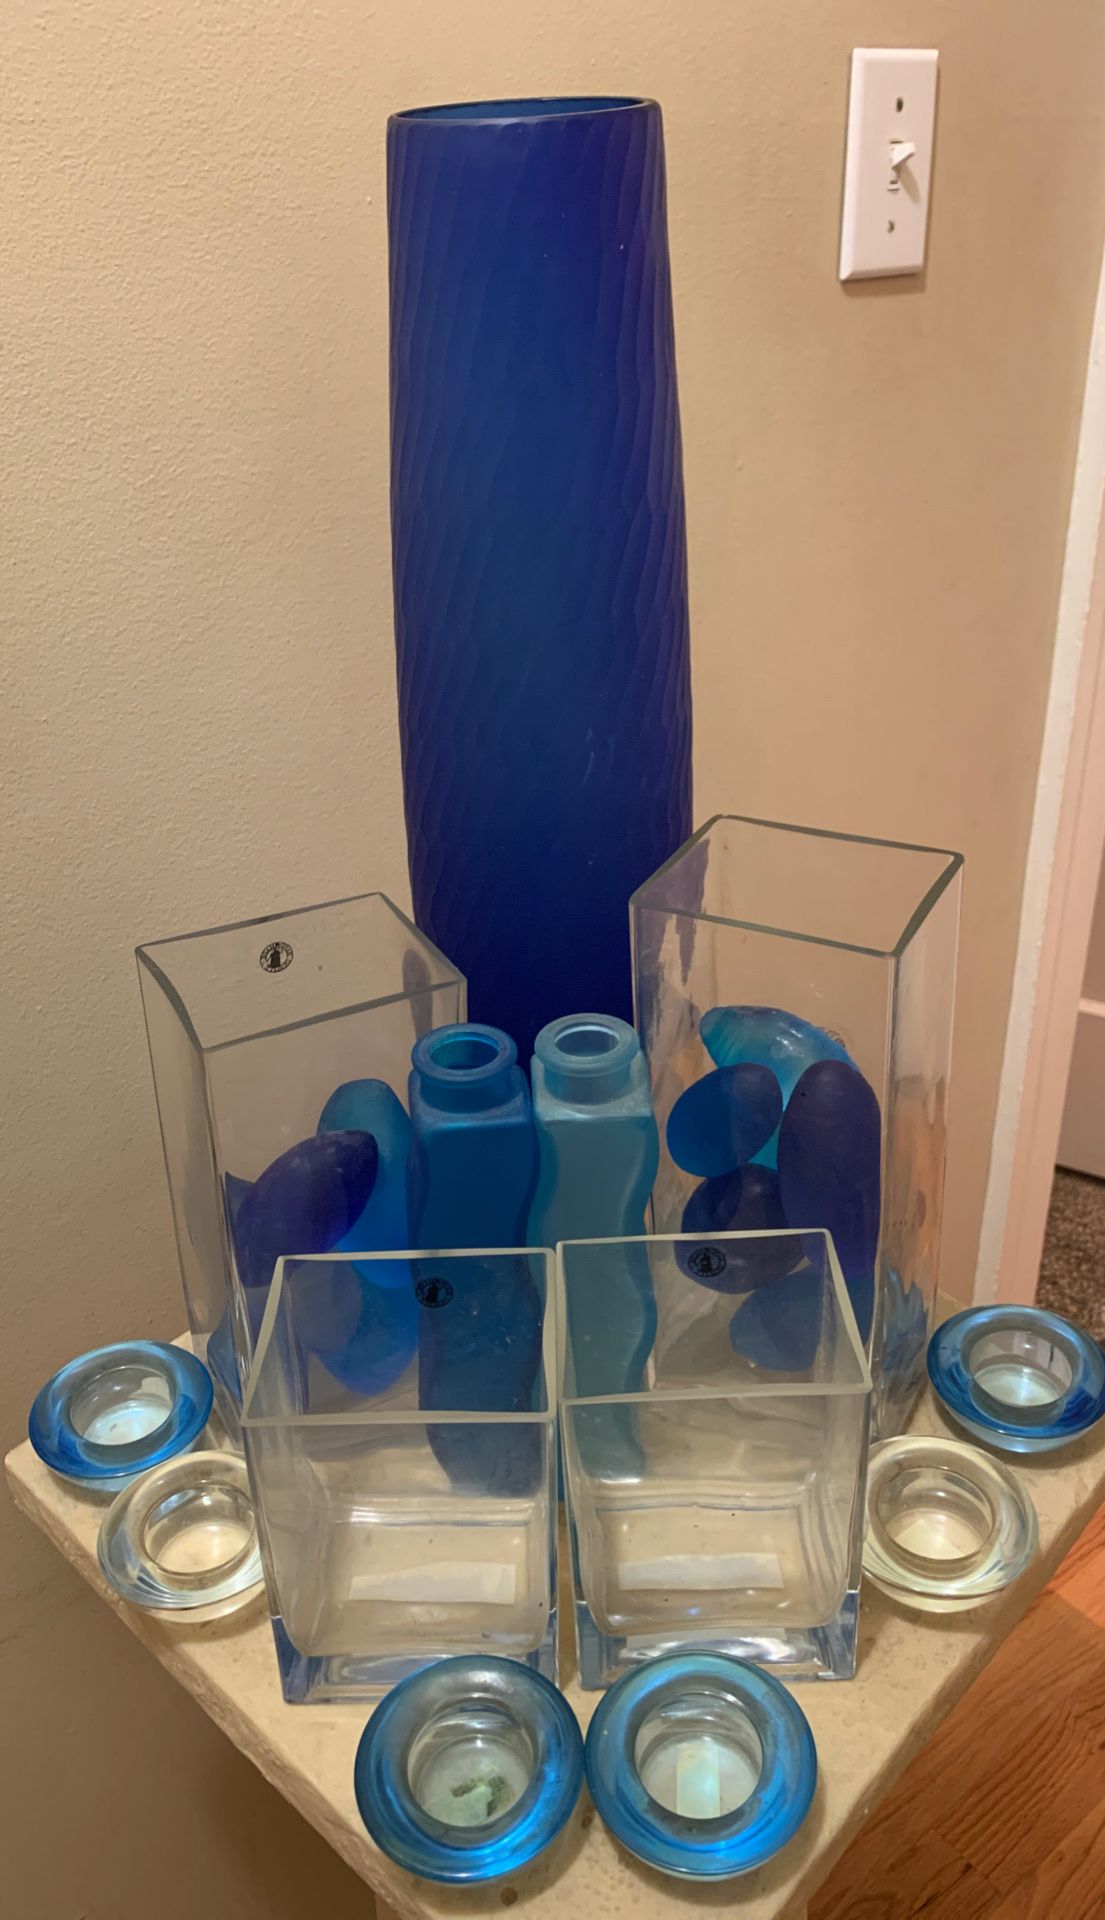 FREE 20” blue glass vase with glass decor